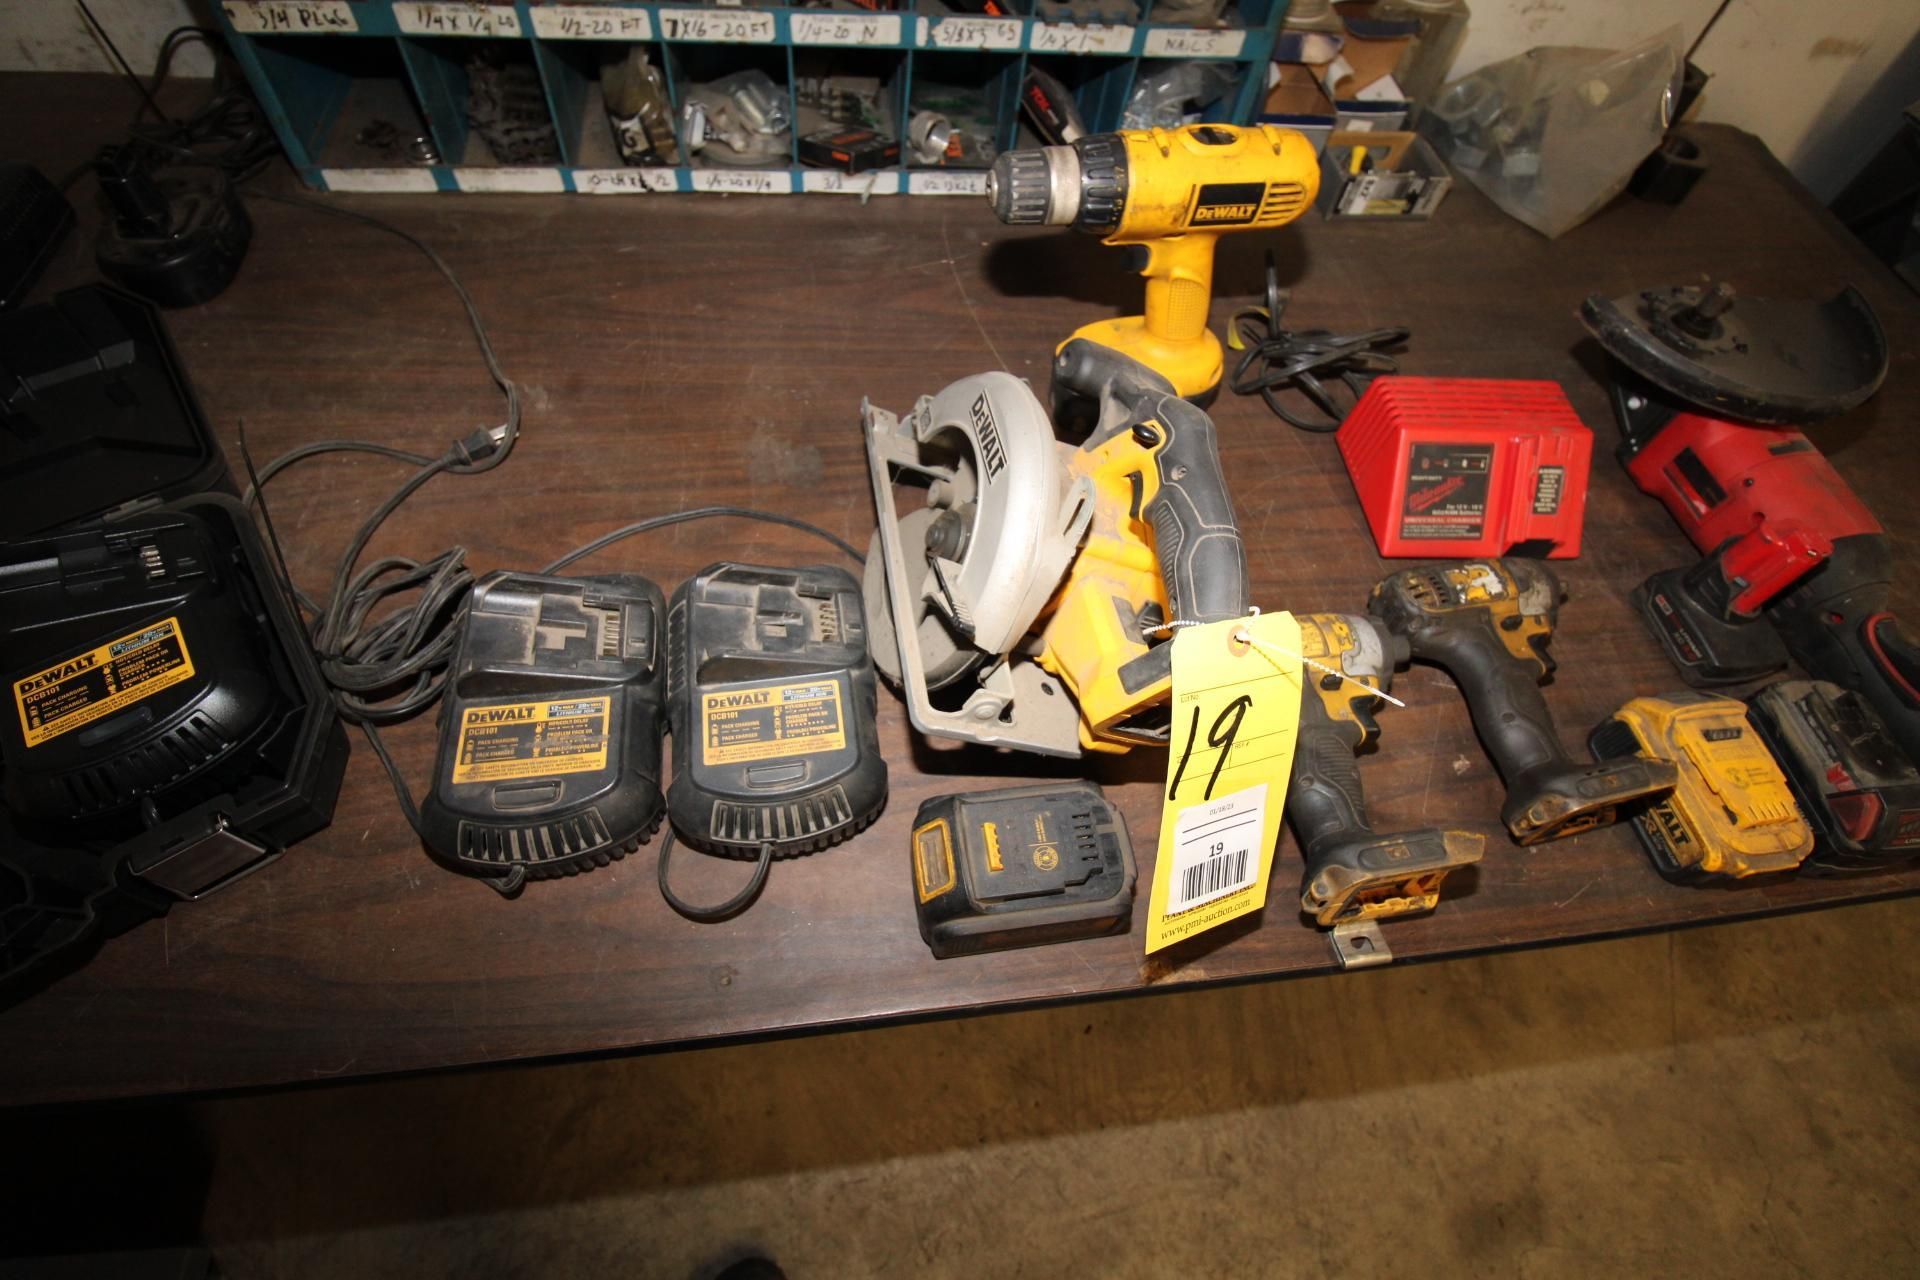 LOT OF BATTERY POWERED TOOLS: (1) Dewalt hand saw, drill, batteries, chargers & Milwaukee grinder, - Image 5 of 5